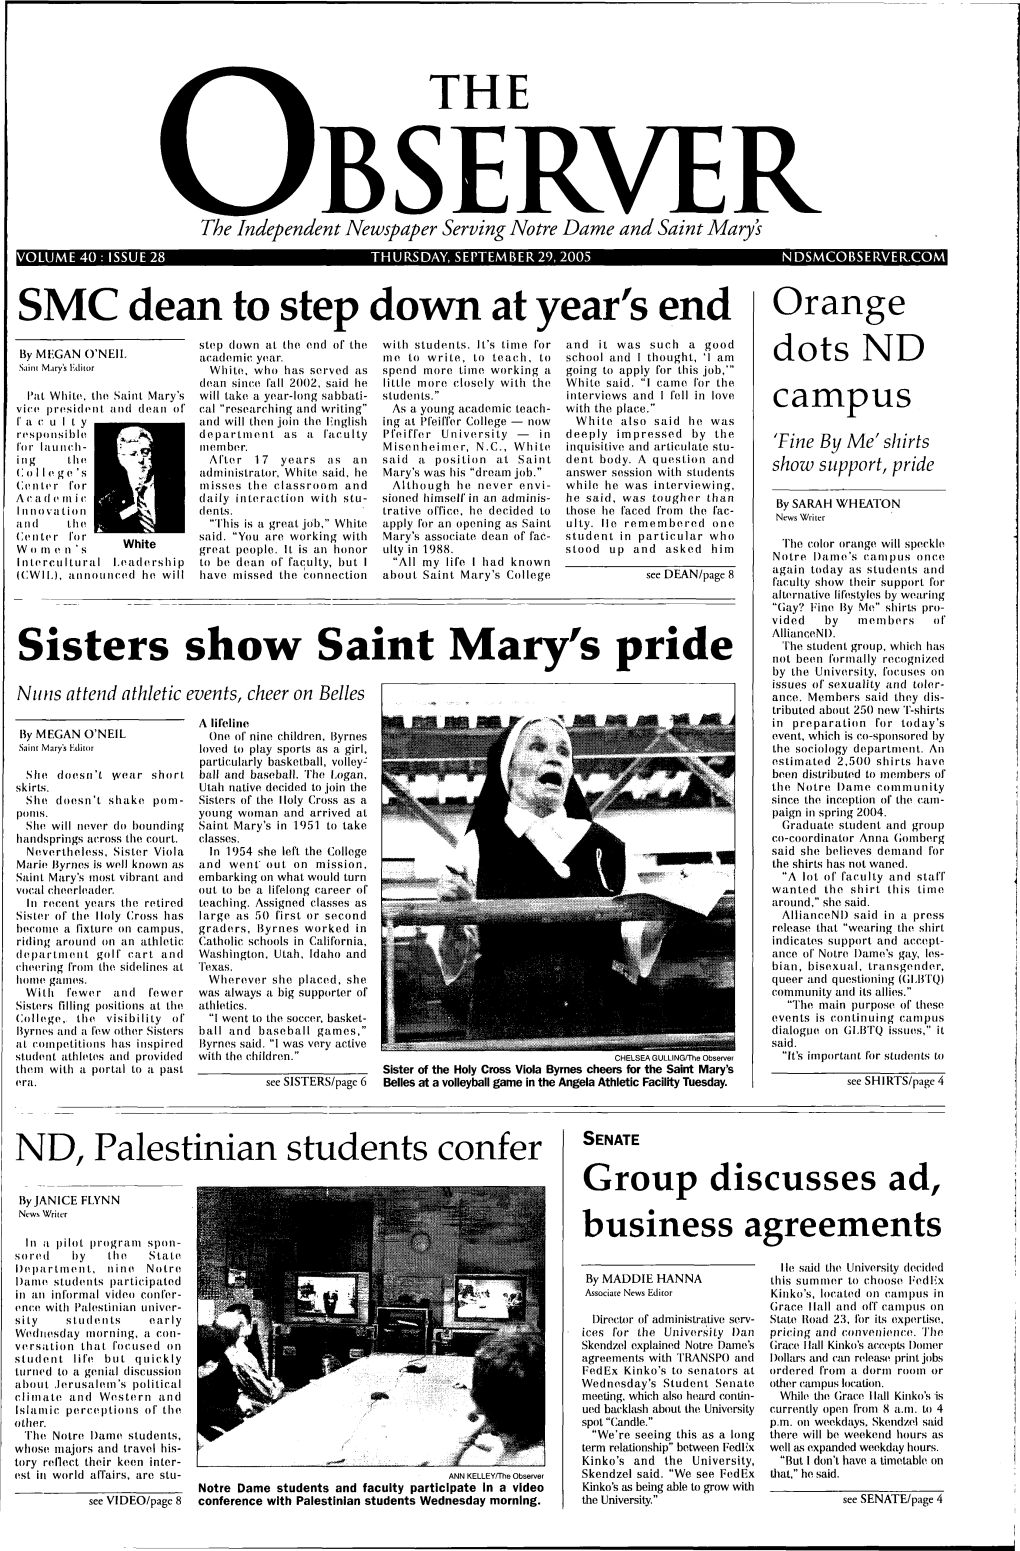 Sisters Show Saint Mary's Pride